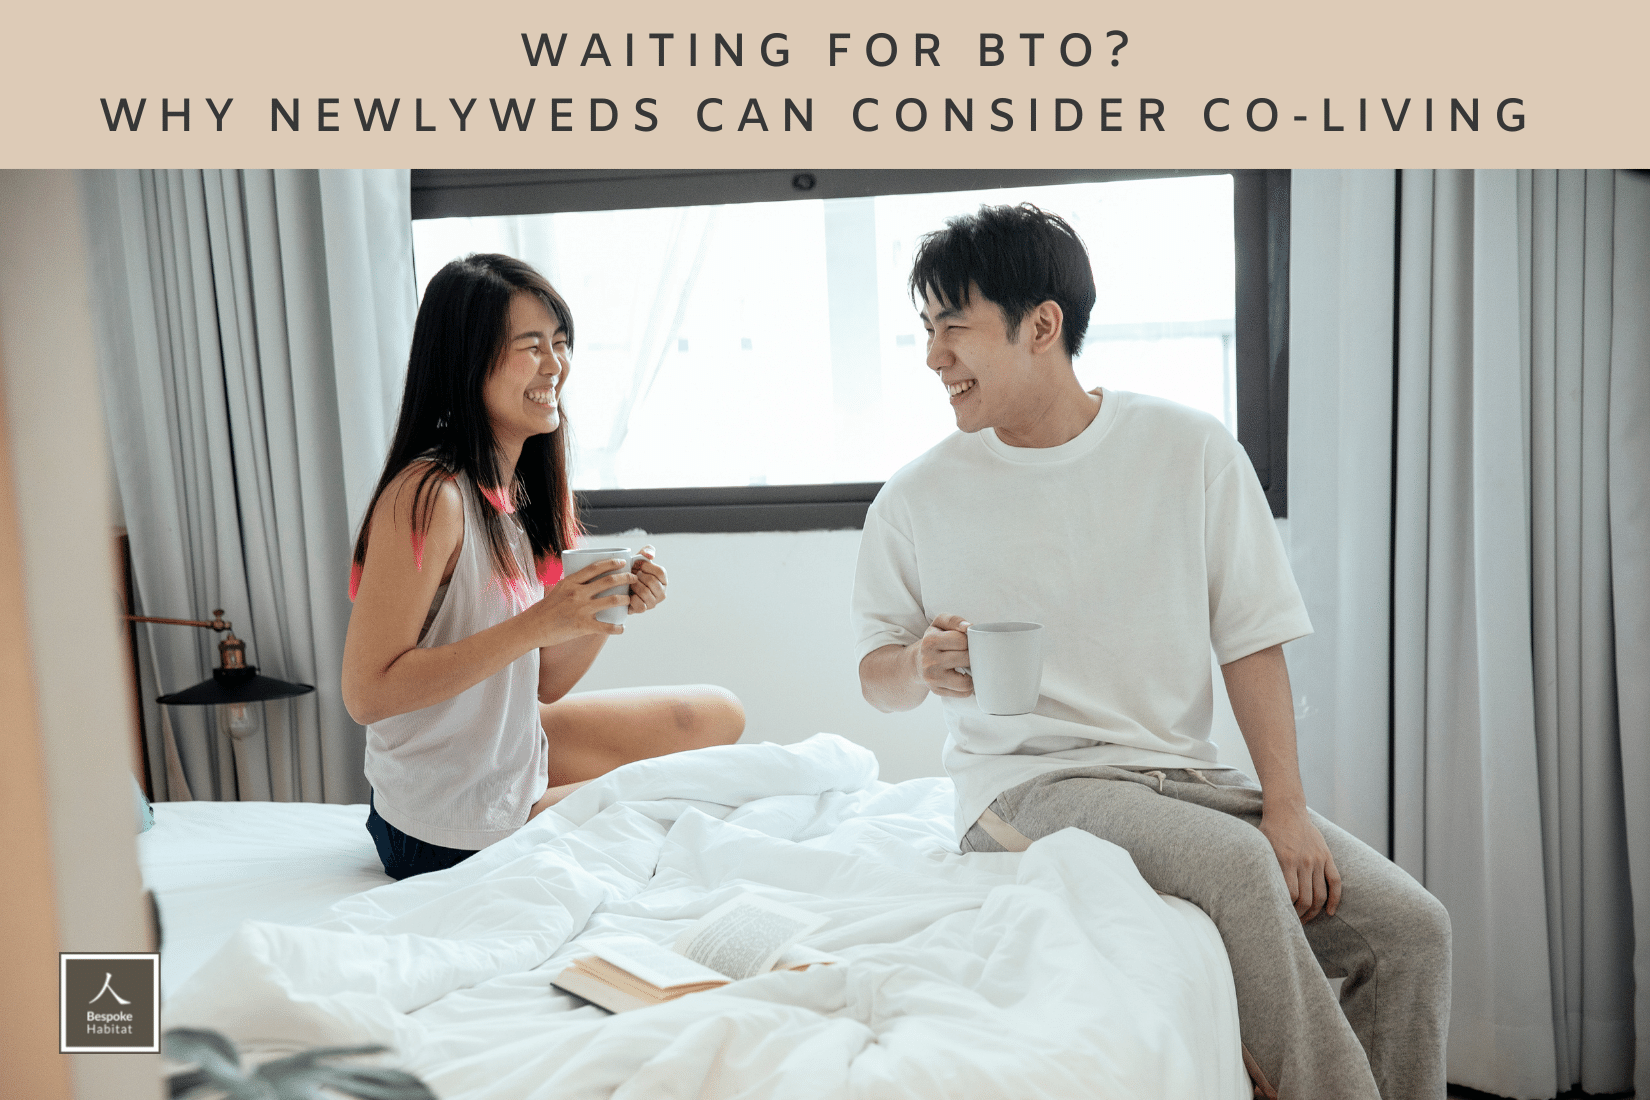 Waiting for BTO co-living for newlyweds